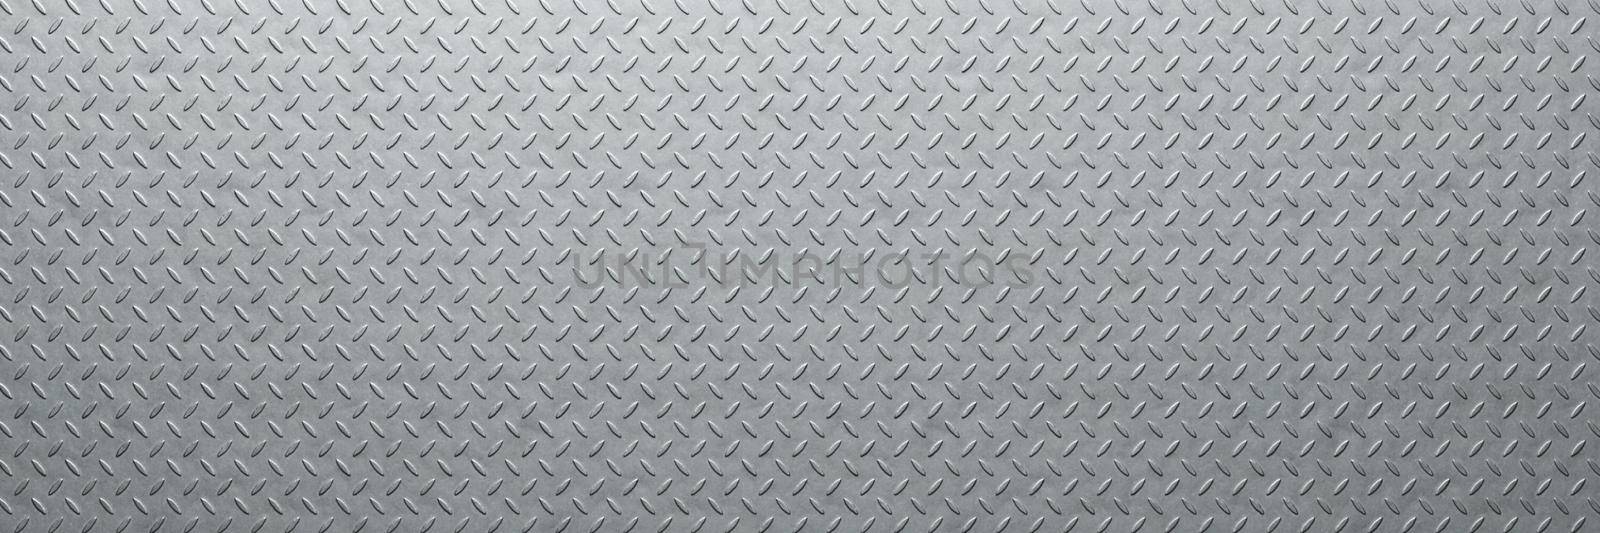 Diamond plate metal background. Brushed metallic texture. 3d rendering by Taut